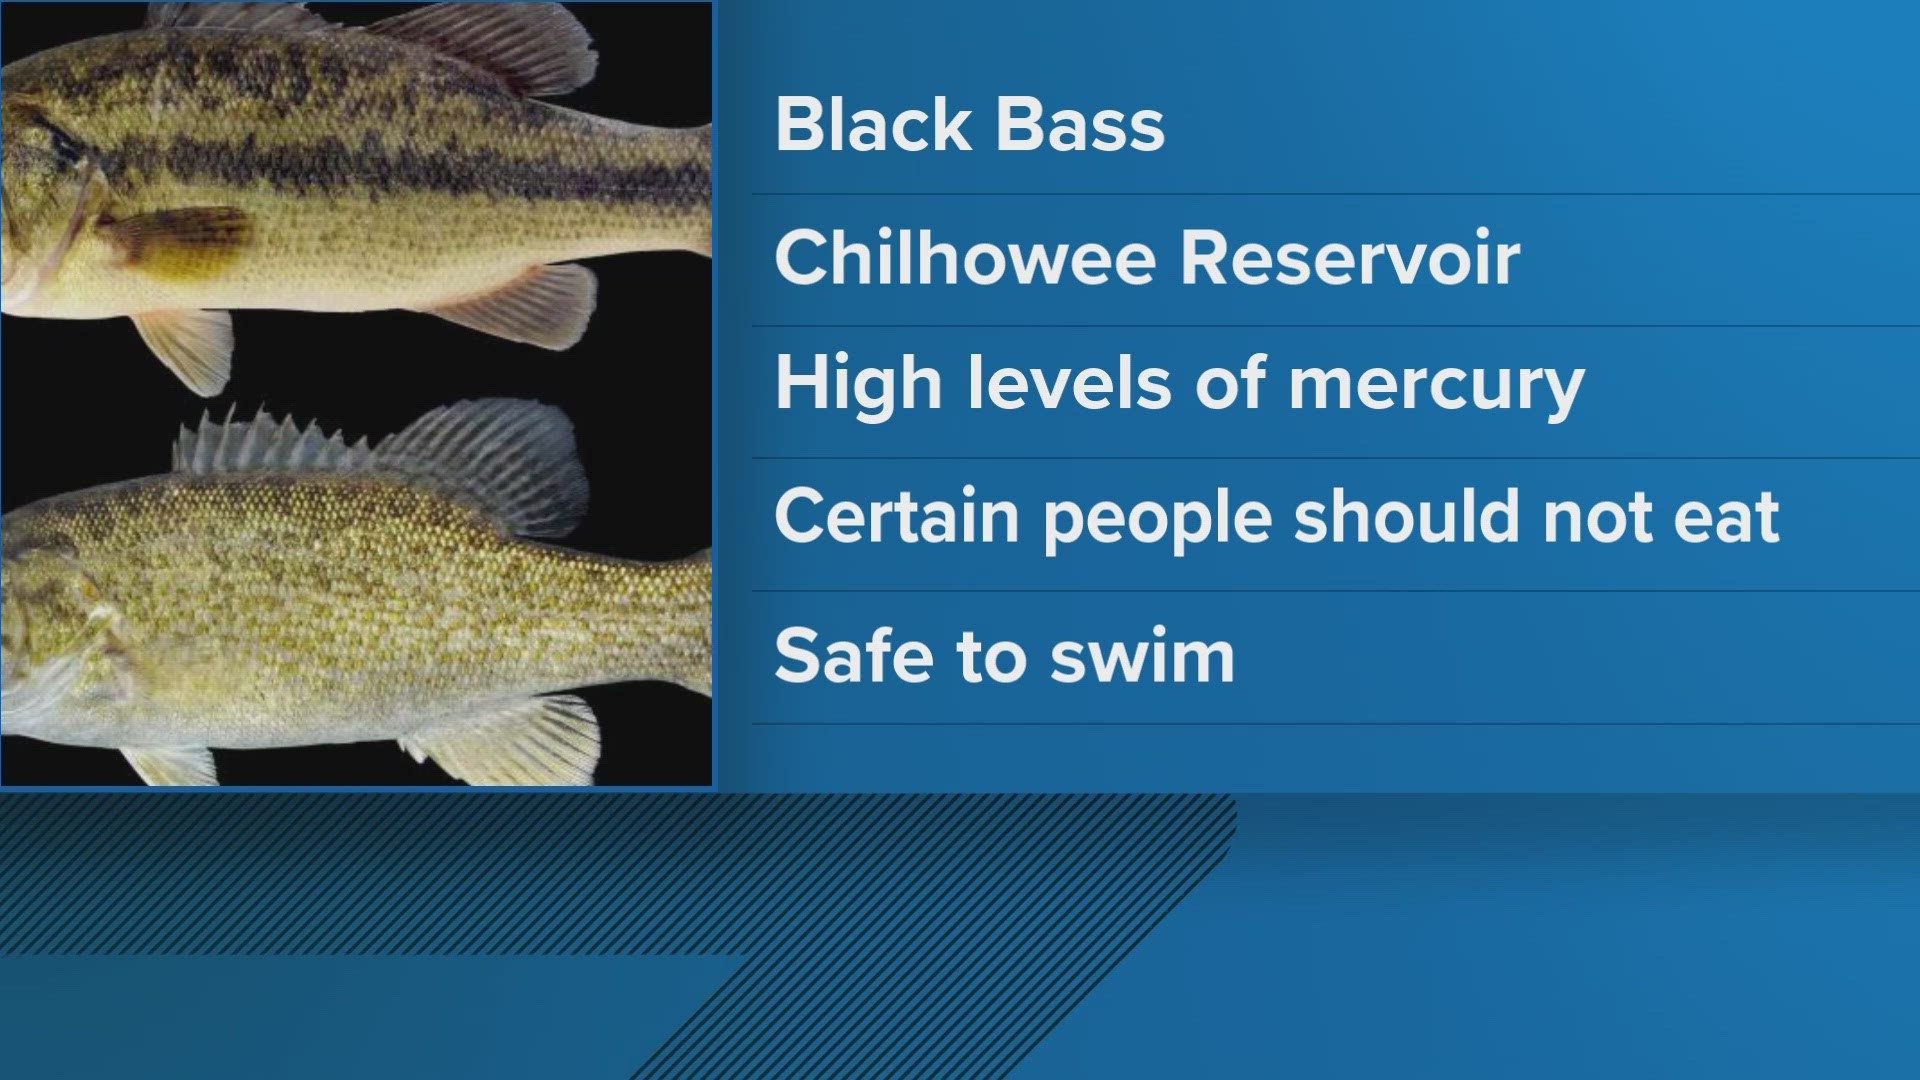 The advisory warns that pregnant women, nursing mothers and children should not eat black bass from the reservoir due to high levels of mercury.